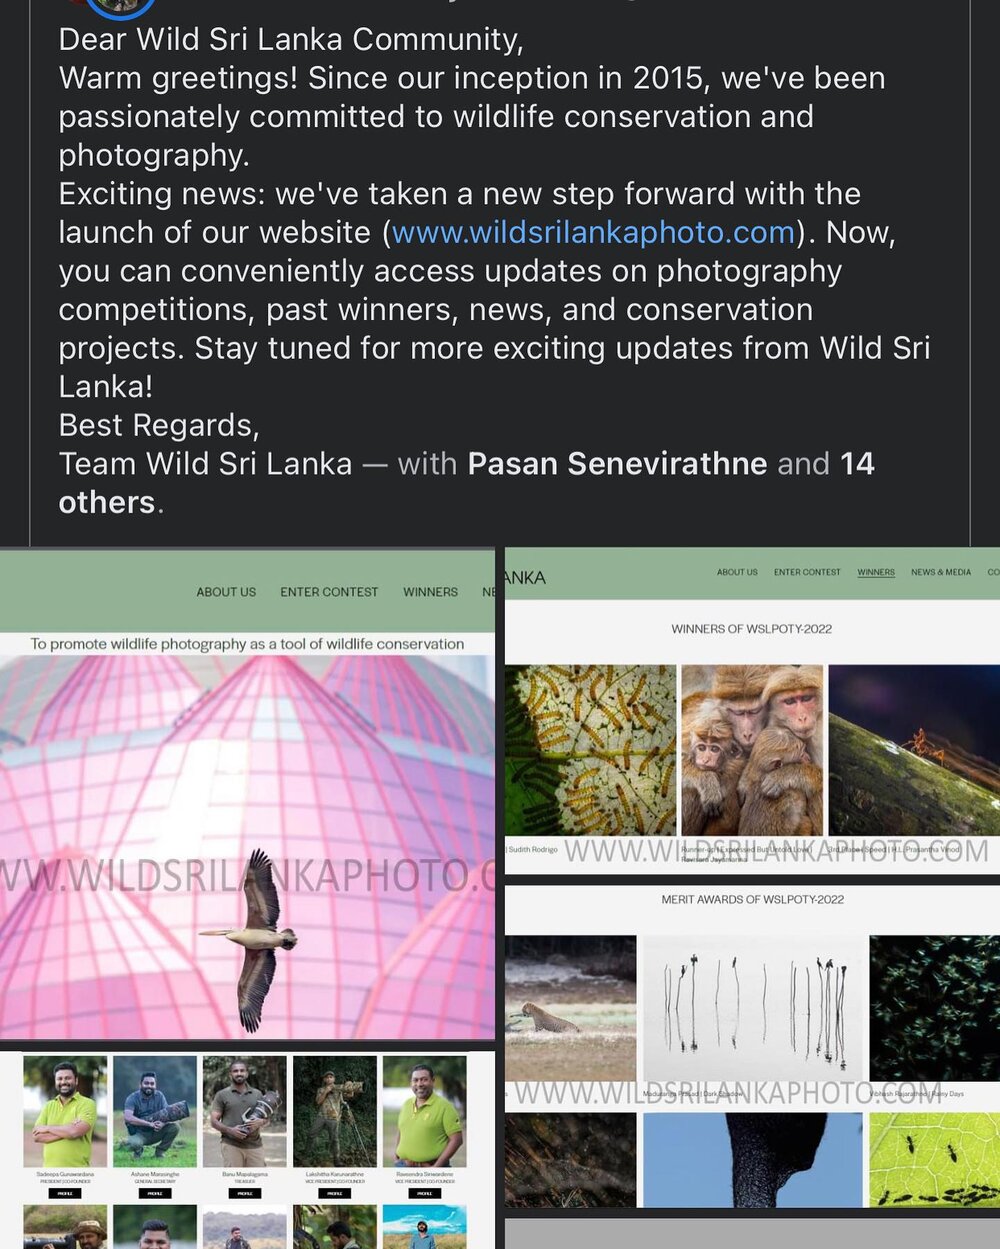 Dear Wild Sri Lanka Community,

Warm greetings! Since our inception in 2015, we&rsquo;ve been passionately committed to wildlife conservation and photography. 
Exciting news: we&rsquo;ve taken a new step forward with the launch of our website (www.wi